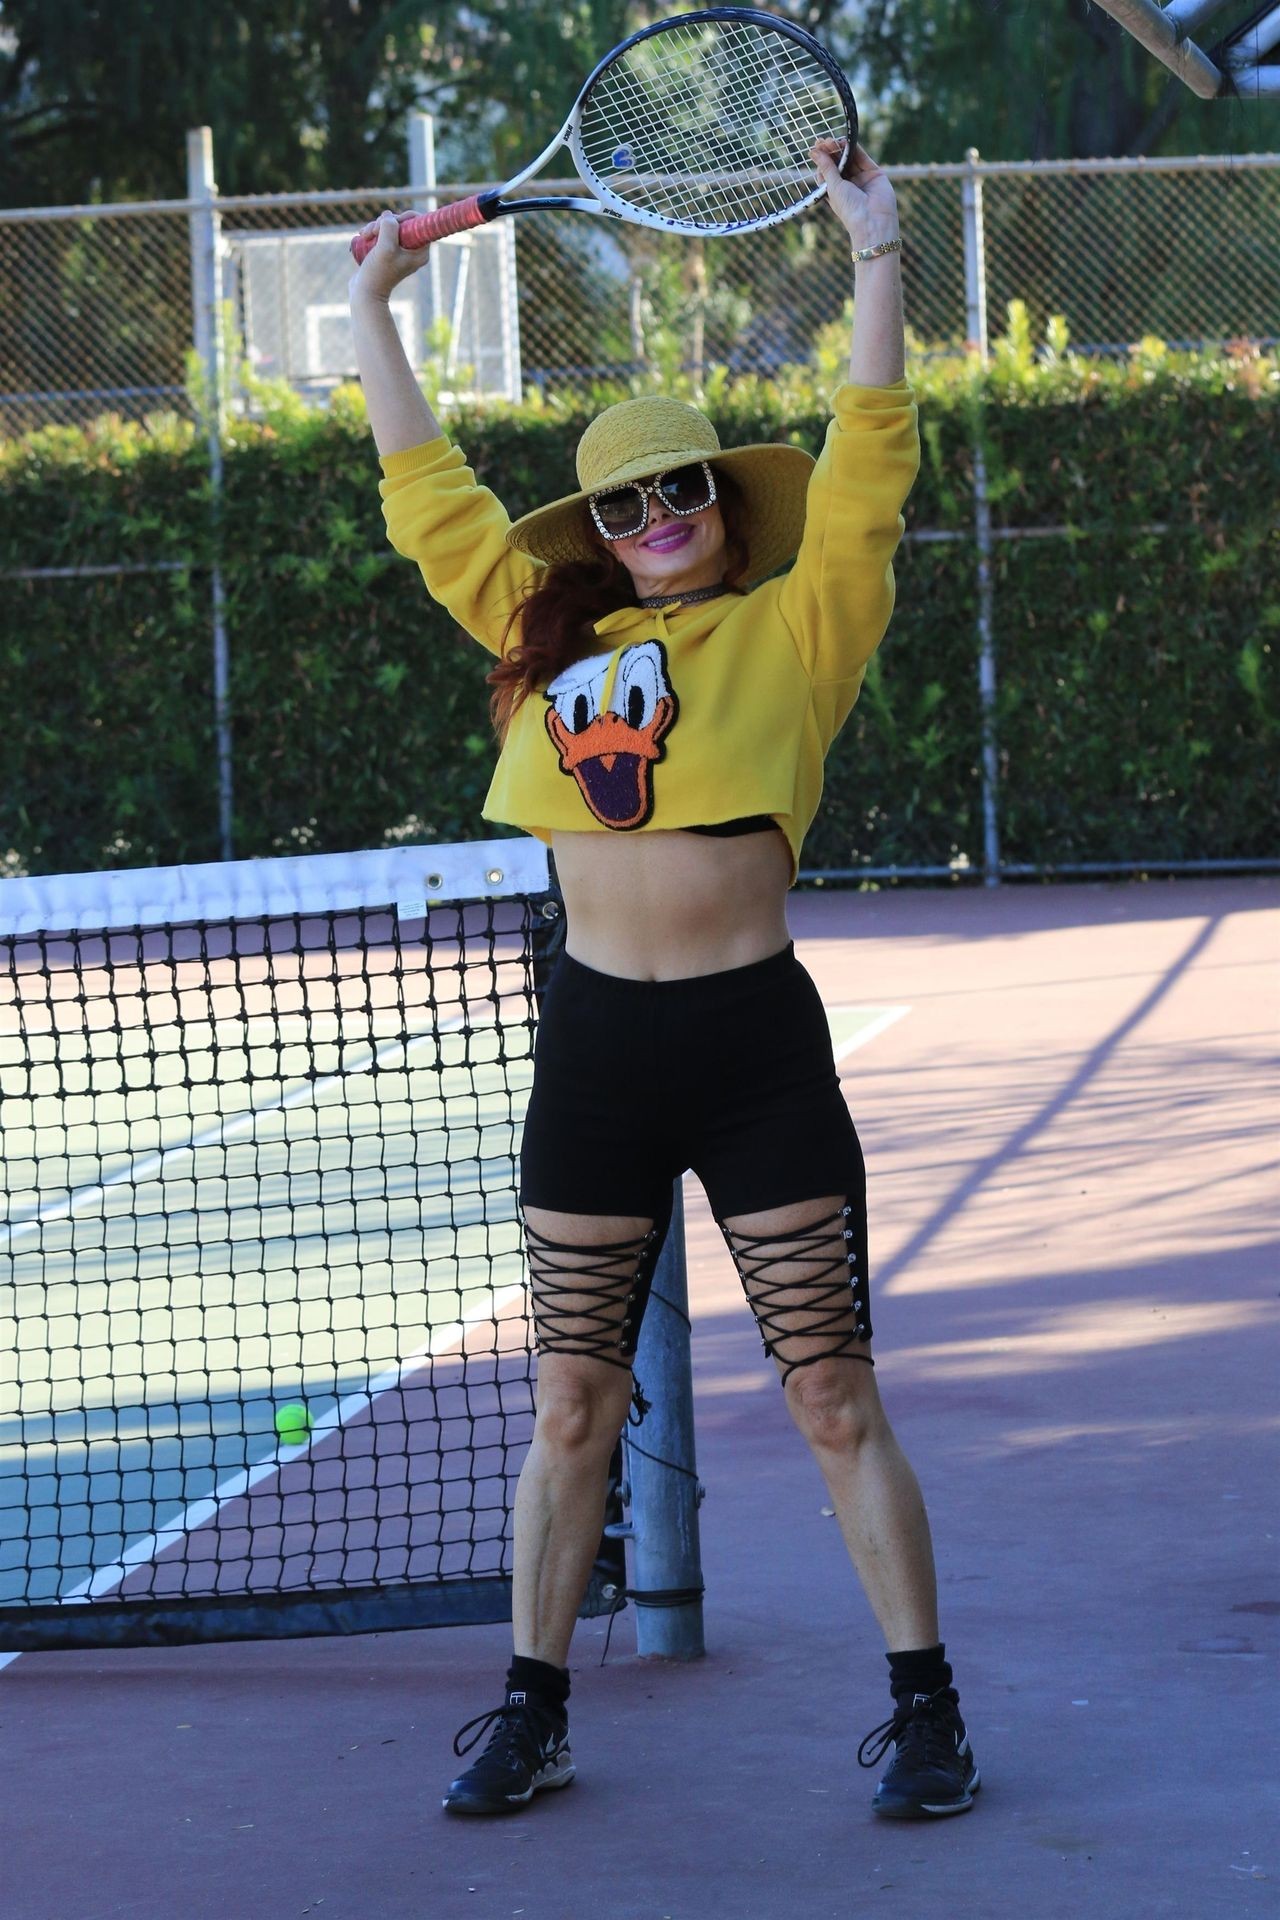 Phoebe Price Has a Nip Slip as She Gets Ready for Tennis (21 Nude & Sexy Photos)